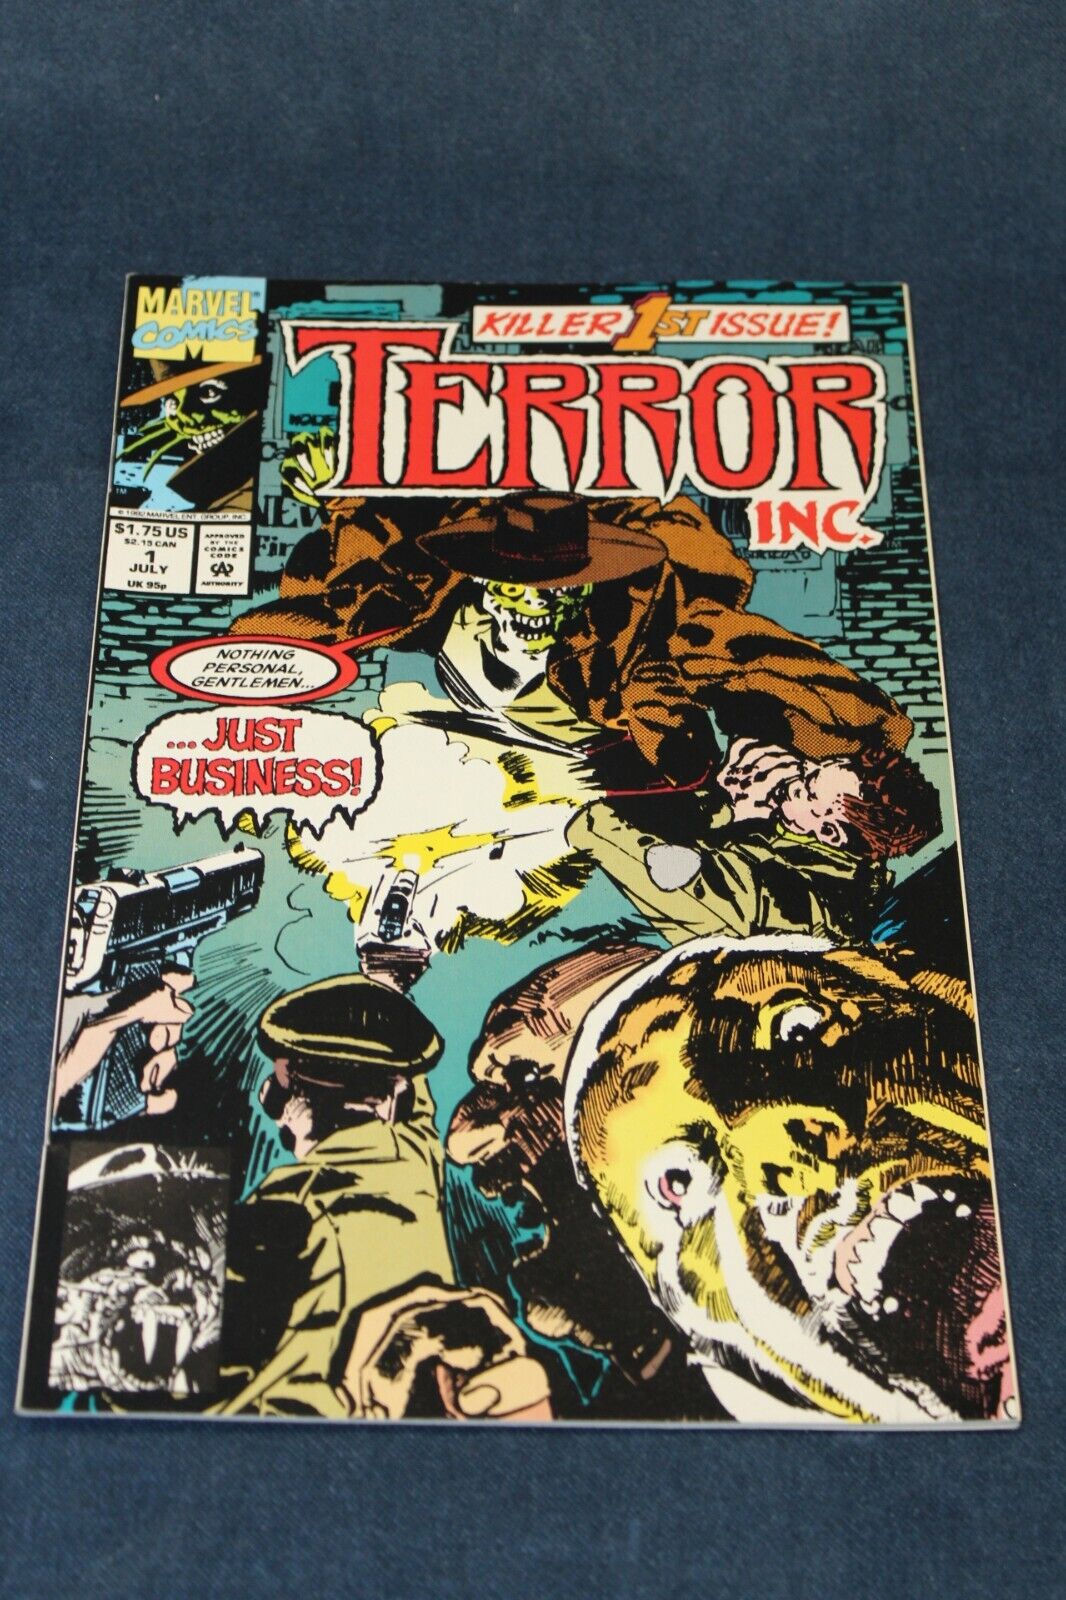 Marvel Comics Terror Inc #1 July. 1992 in excellent/mint condition